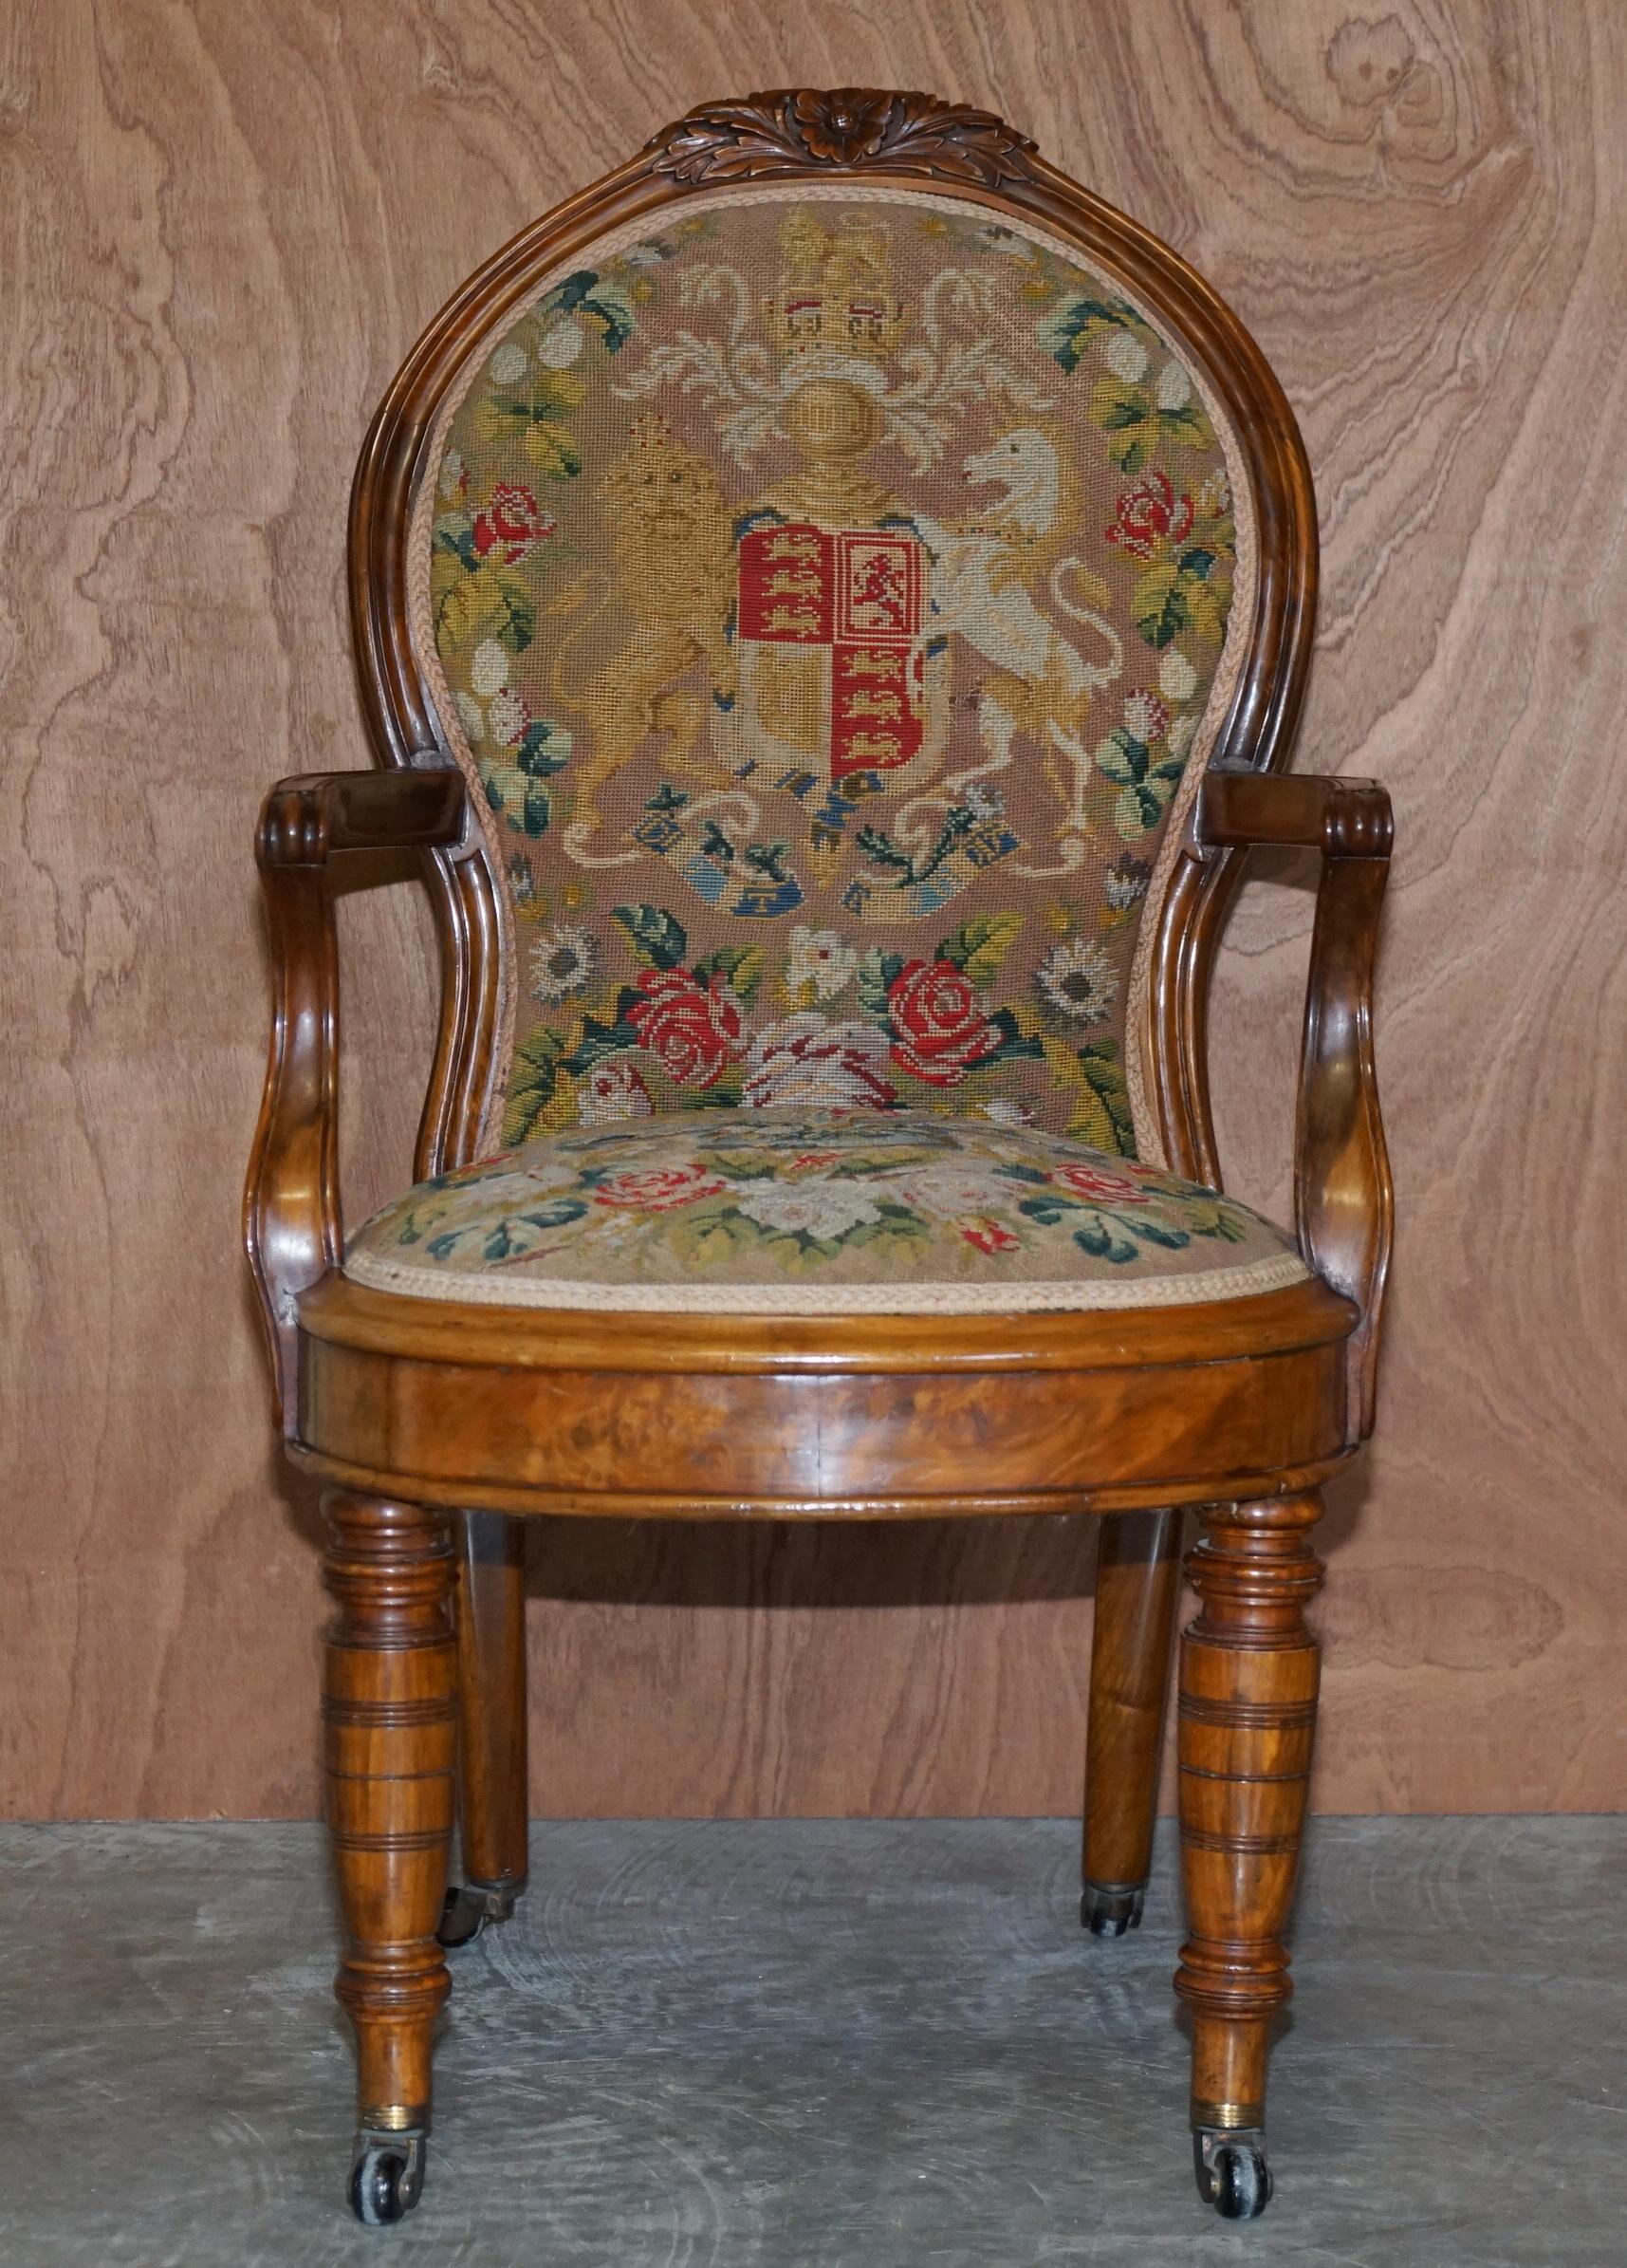 We are delighted to offer for sale this truly sublime, high Victorian Burr Walnut occasional chair with truly exquisite Royal Coat of Arms Armorial crest embroidered seat and back rests

This chair is a work of art, I can’t believe the embroidery